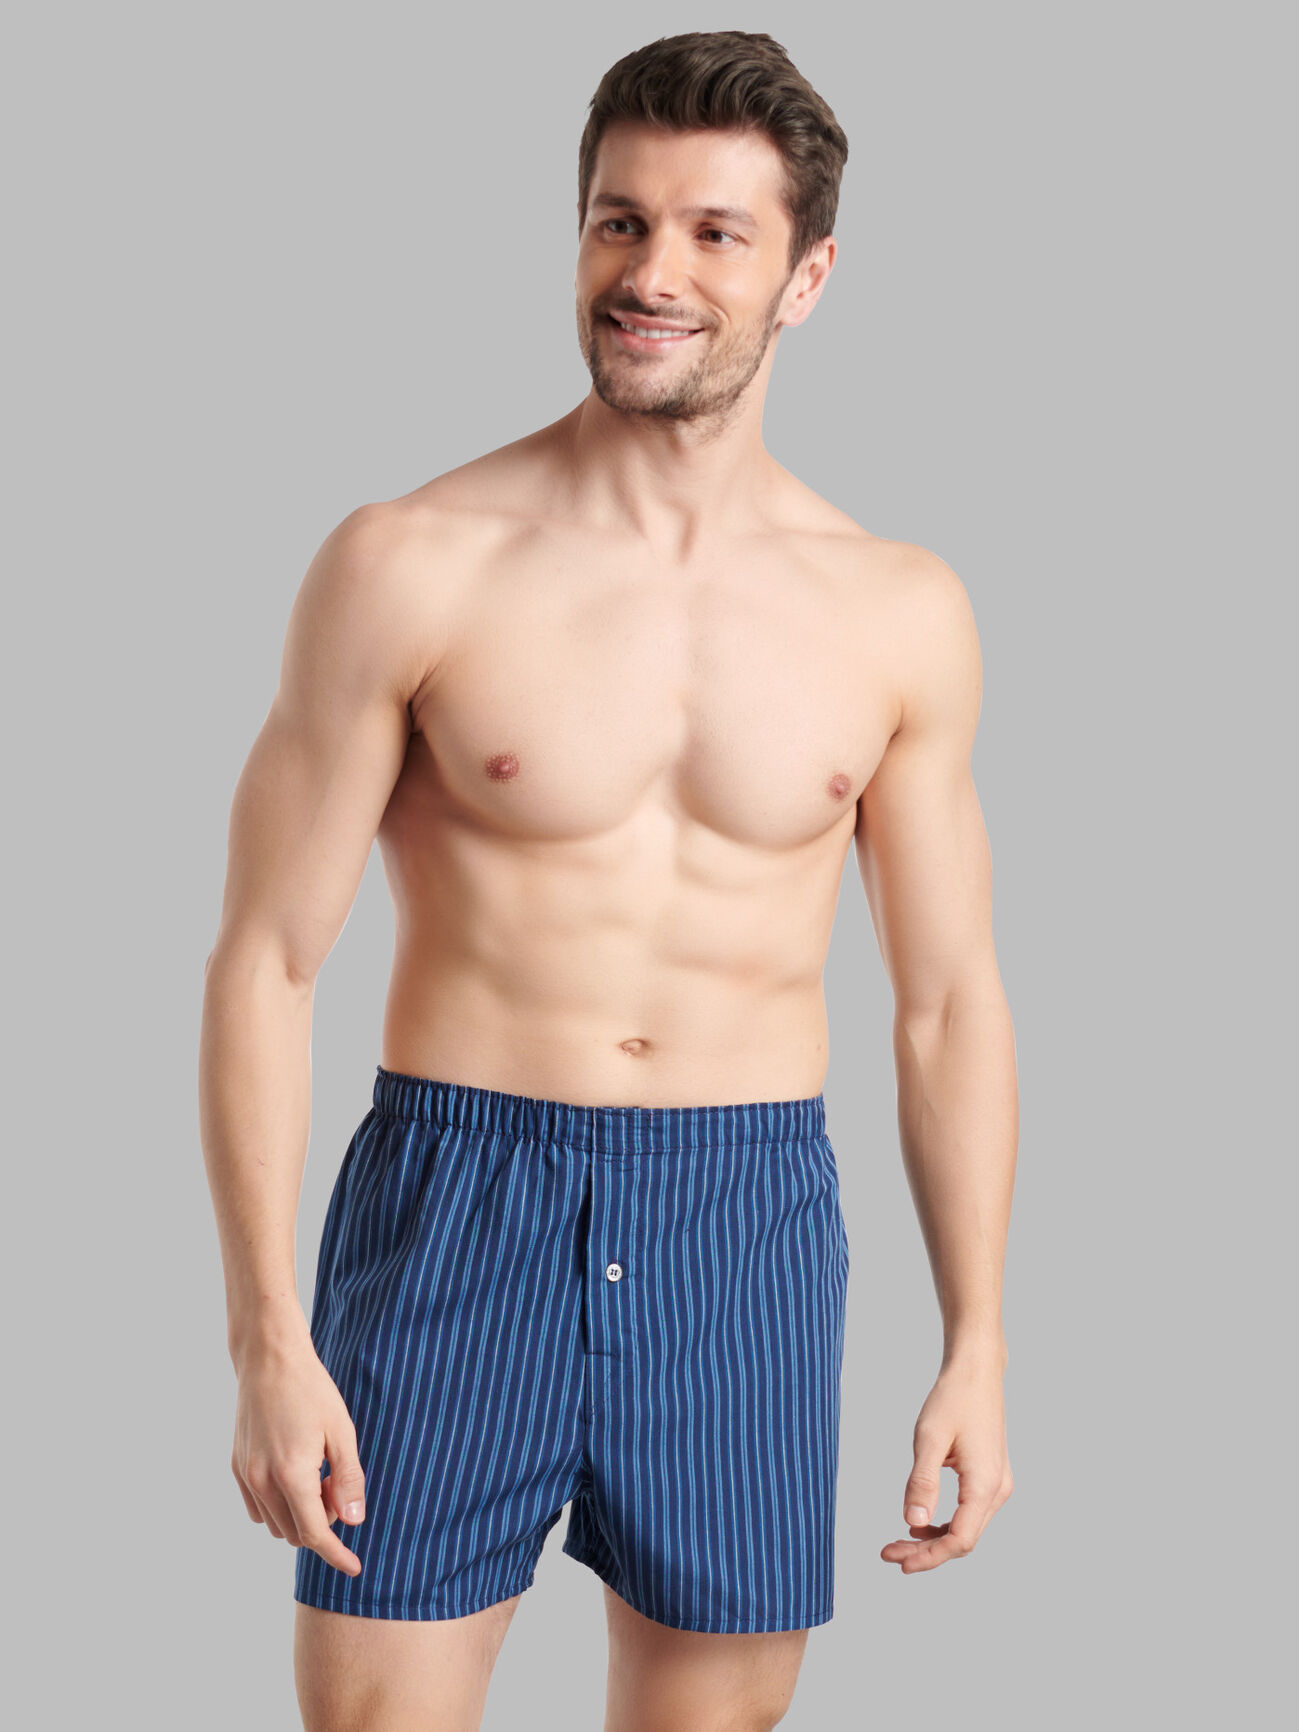 Fruit of the Loom Men's Premium Boxers, Assorted Plaid 4 Pack Assorted